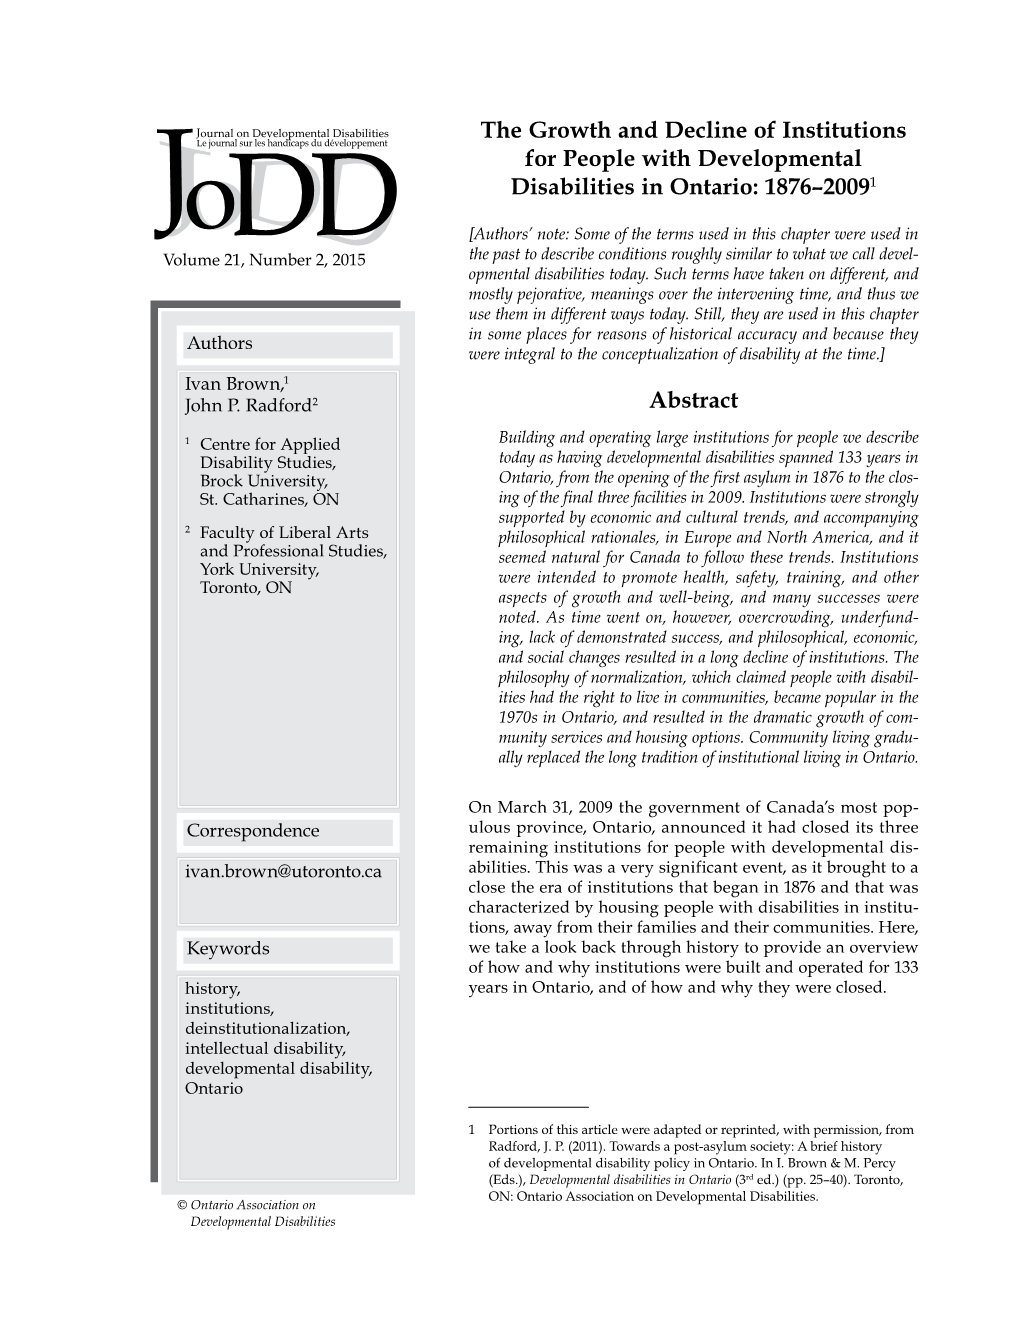 The Growth and Decline of Institutions for People with Developmental Disabilities in Ontario: 1876–20091